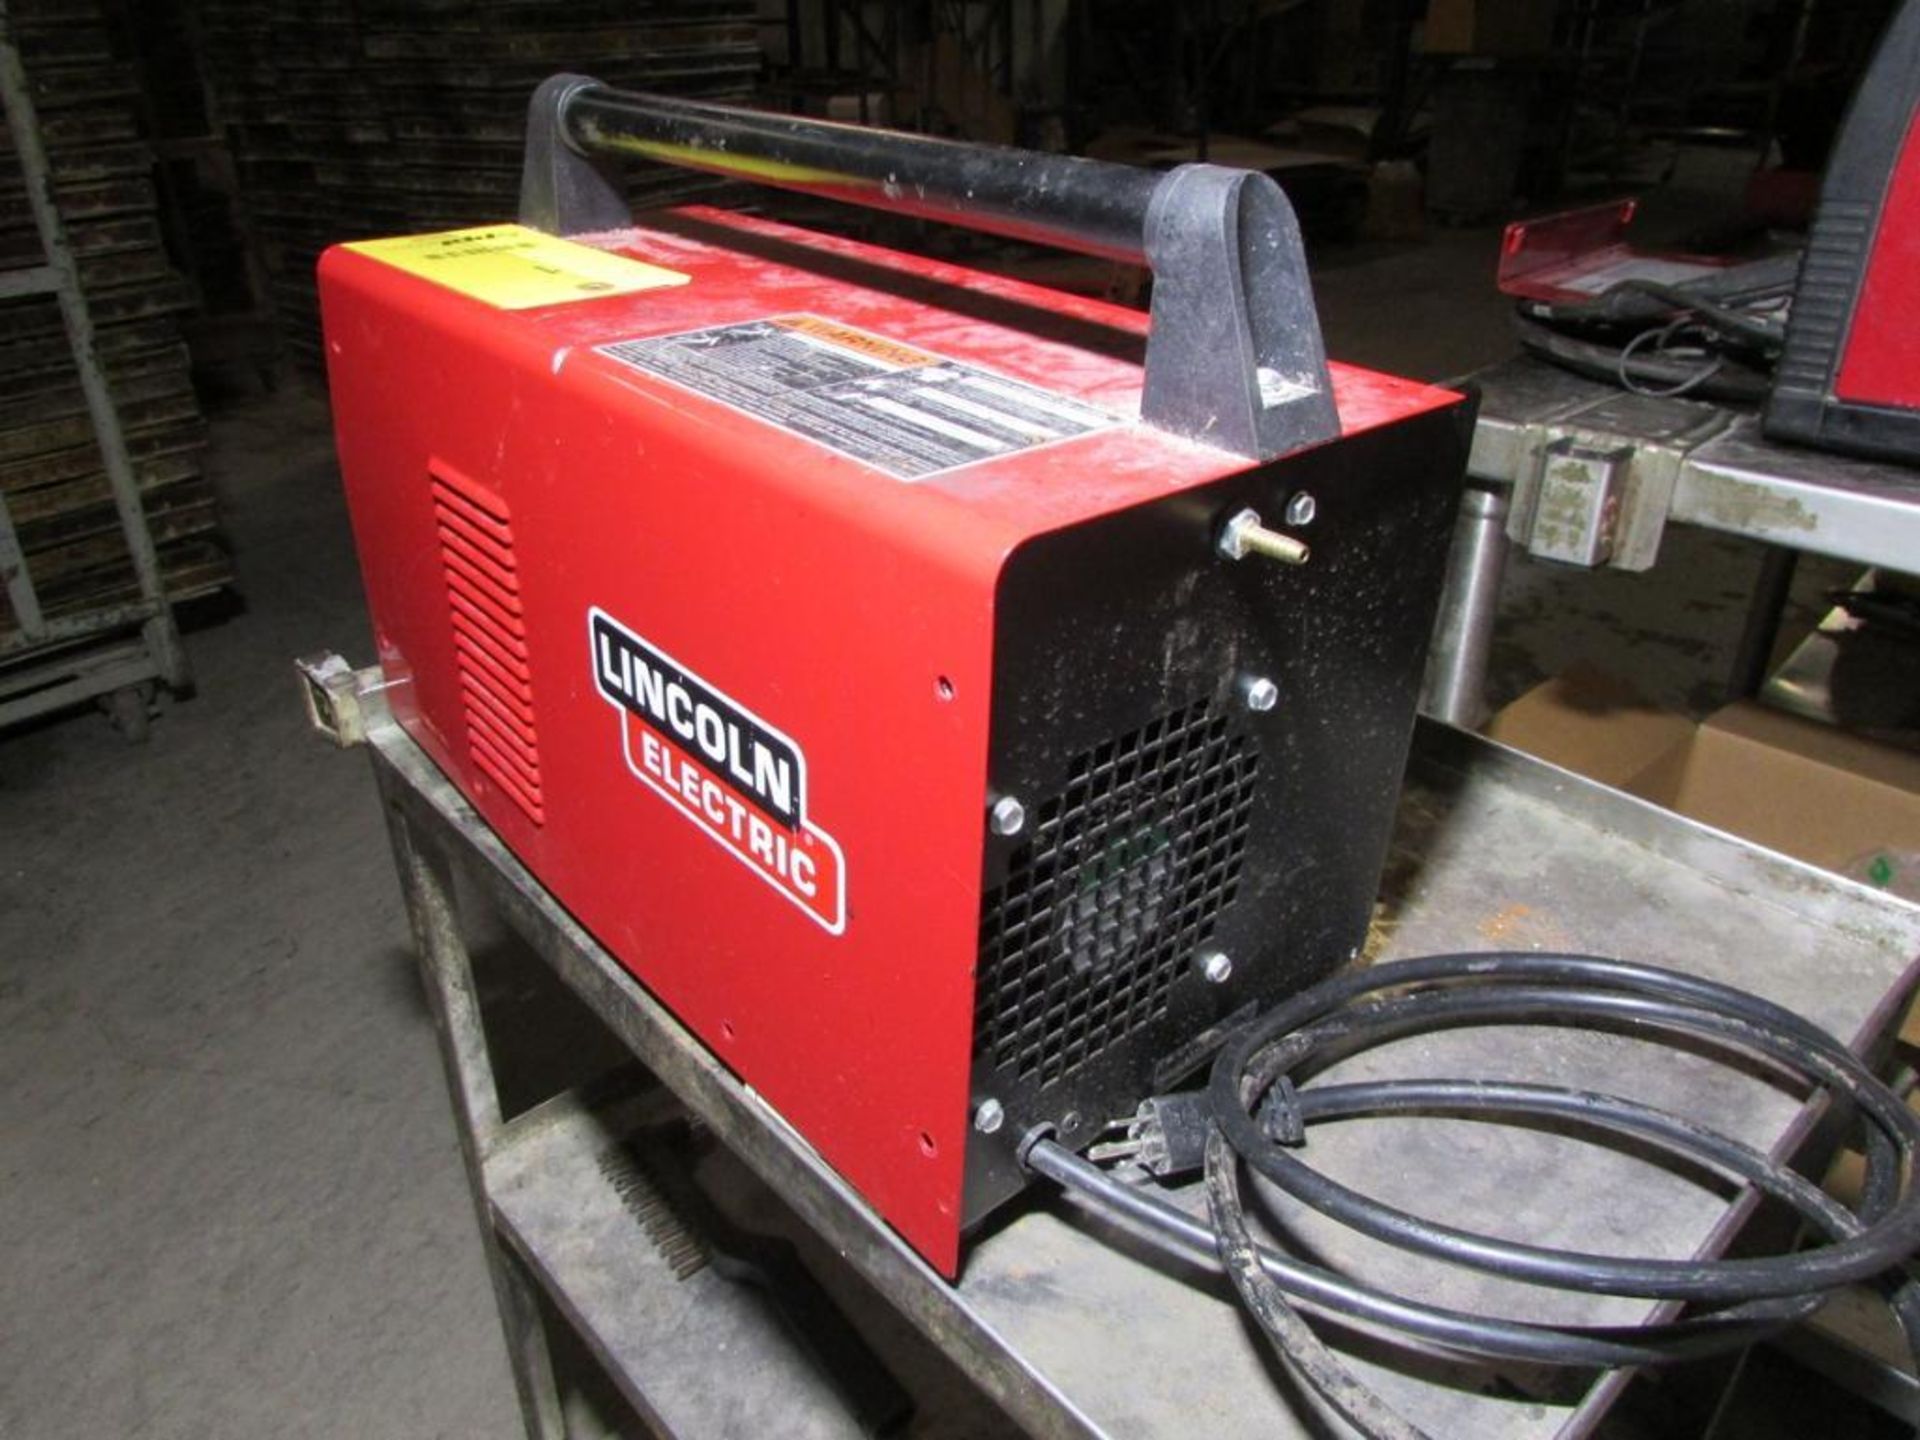 Lincoln Electric Handy MIG Wire Welder. 35-88A, 70A 17V 20% Duty Cycle Output, 115V 20A 60Hz 1PH Inp - Image 5 of 7